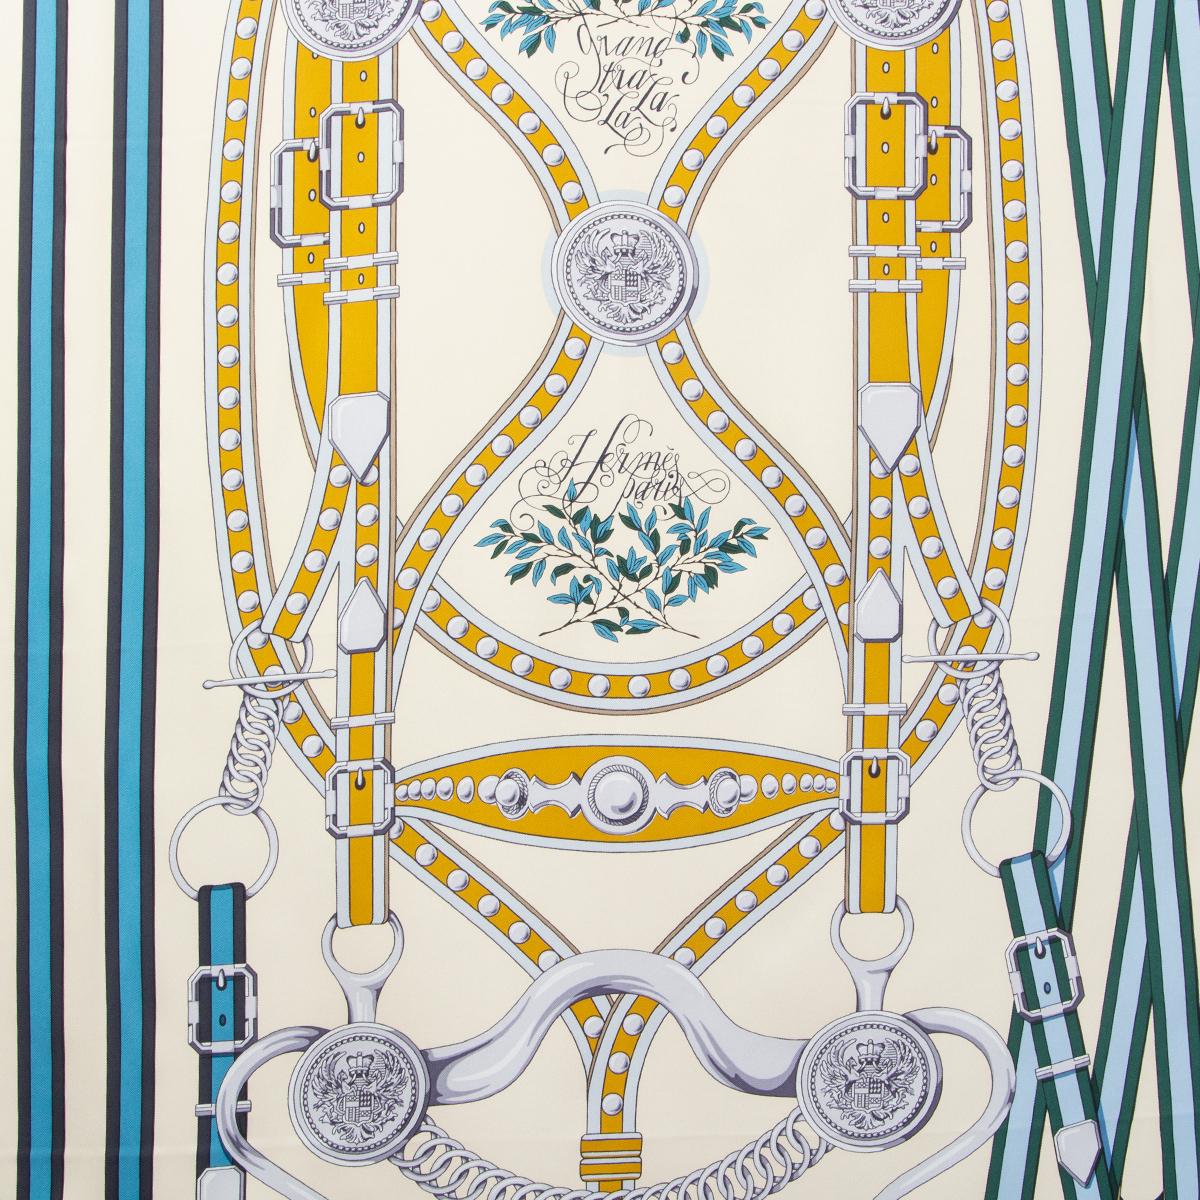 100% authentic Hermès 'Grand Tralala 90' scarf by Virginie Jamin in ivory silk twill (100%) with contrasting light blue hem and details in shades of blue, green, mustard, black, grey and coral. Brand new.

During the reign of Franz Joseph I of